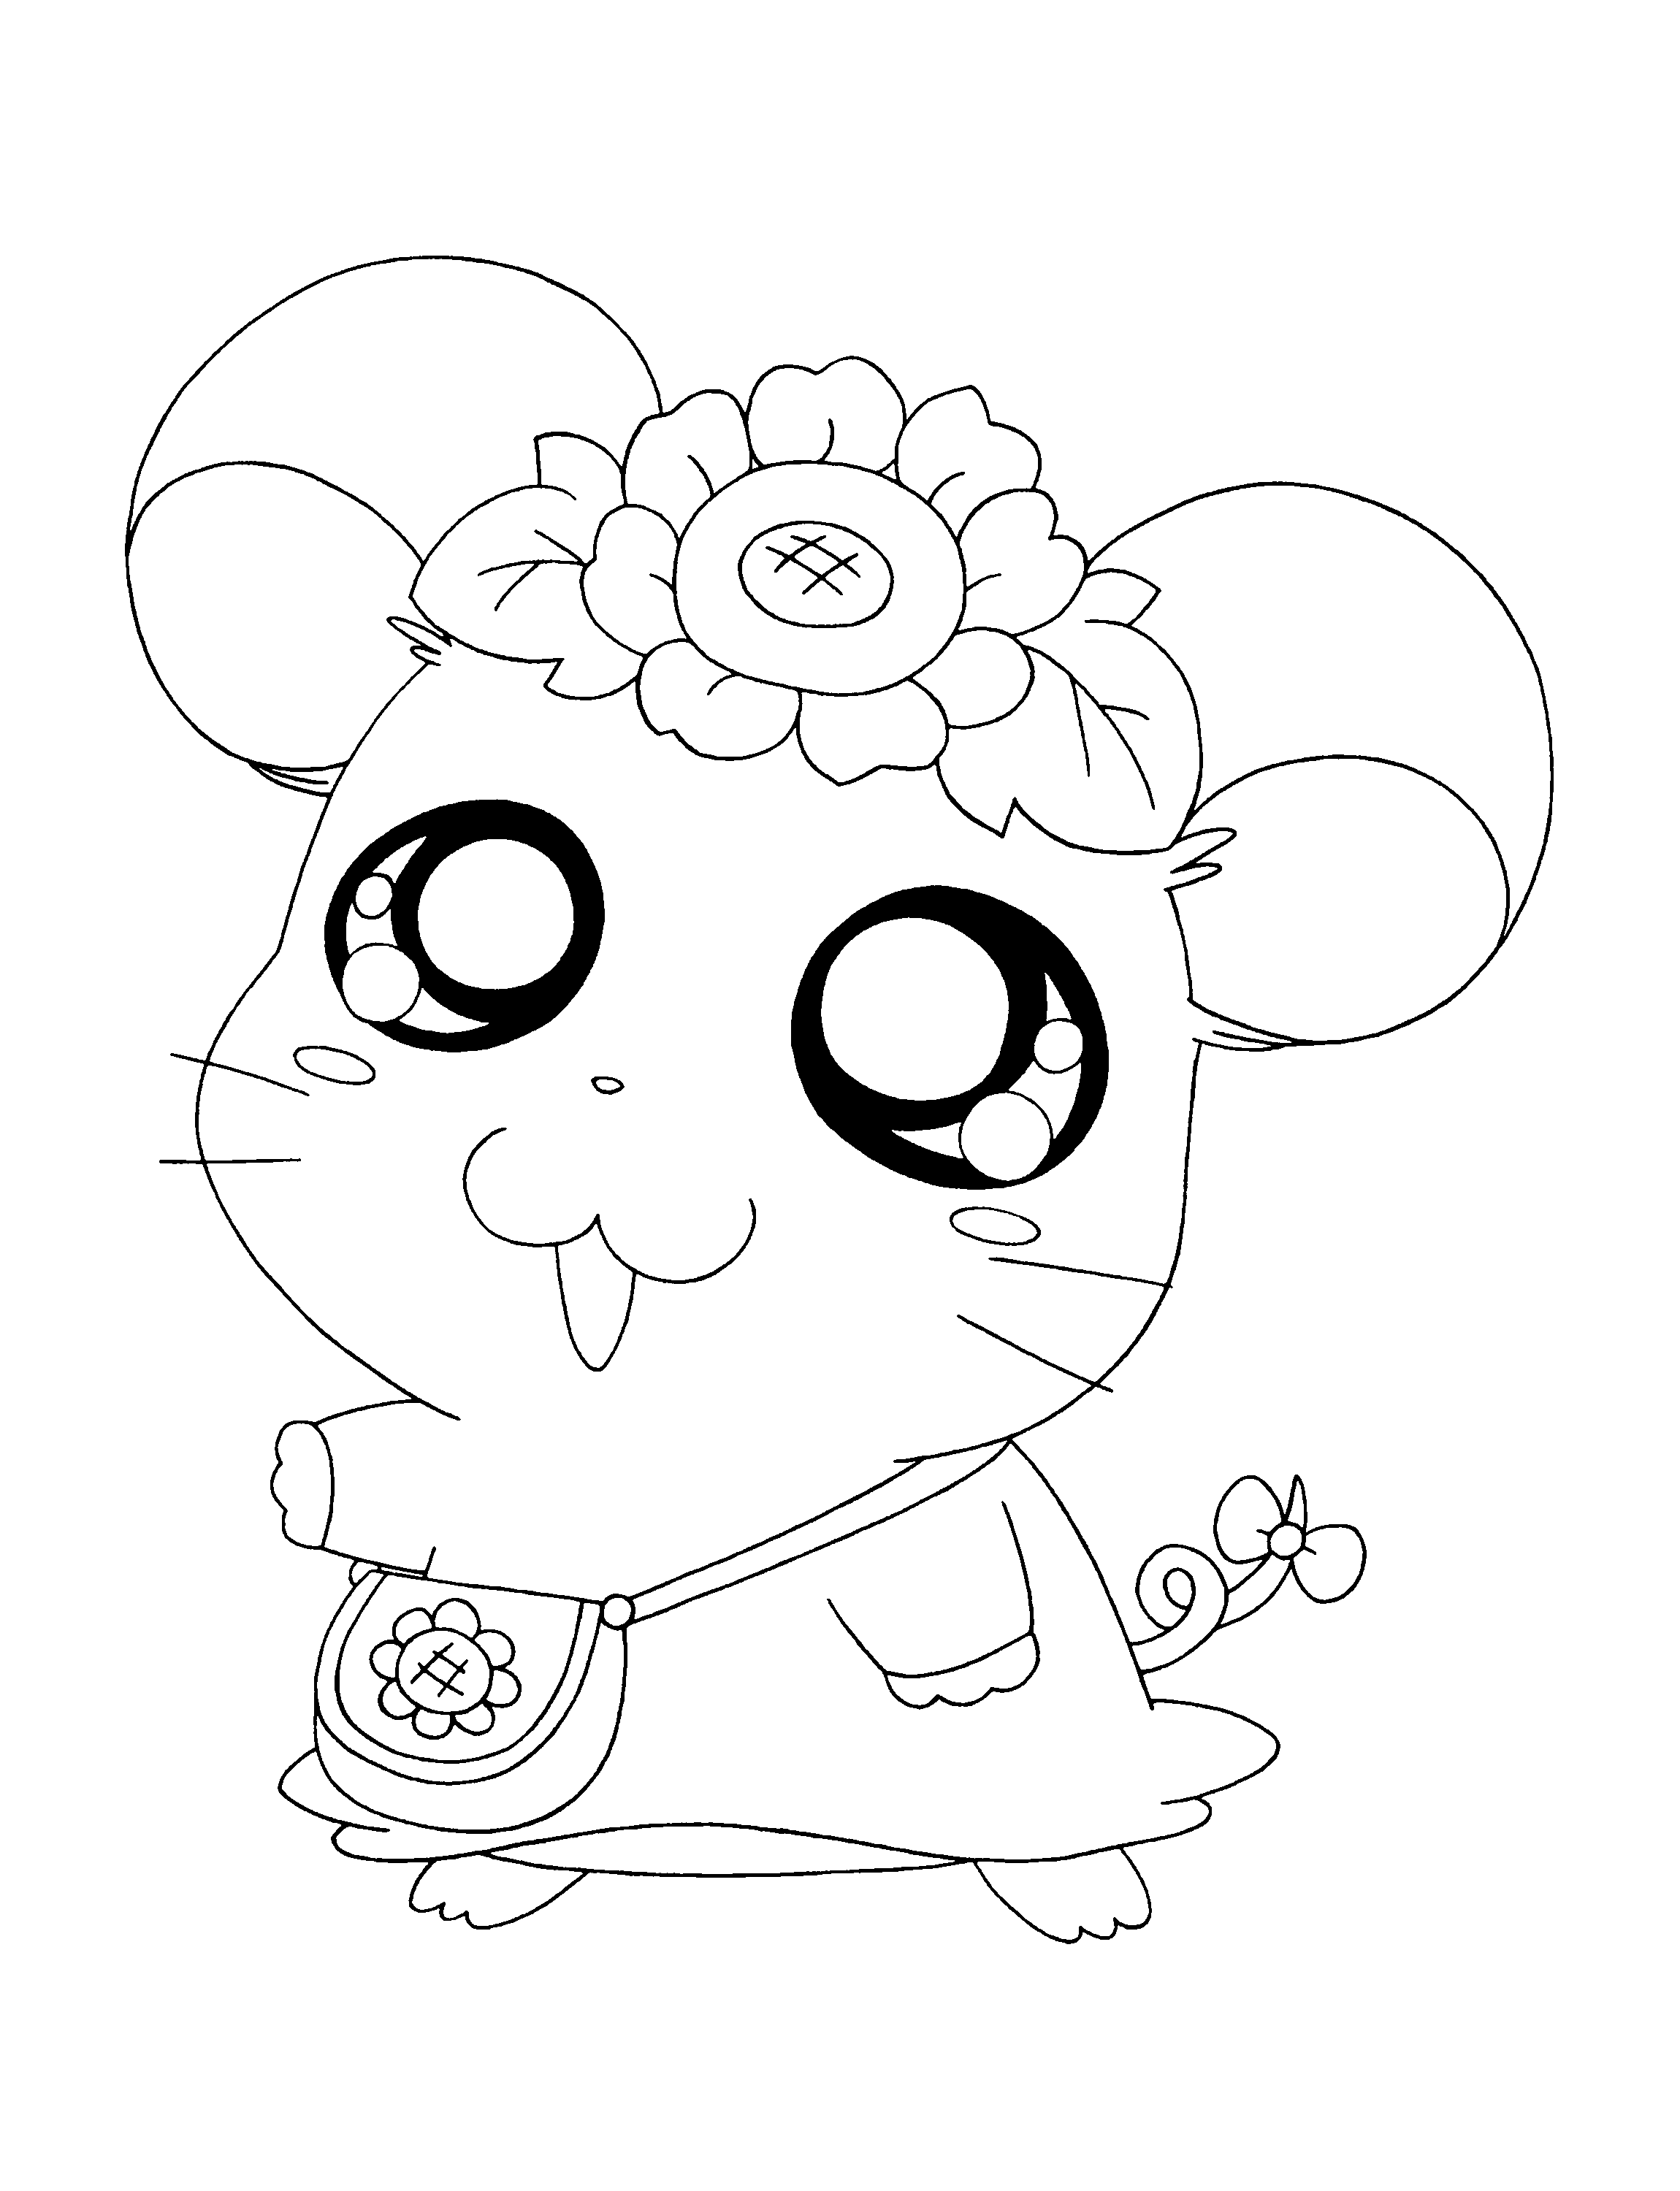 Hamtaro Coloring Pages Cartoon Coloring Pages Animal Coloring Pages Cute Coloring Pag